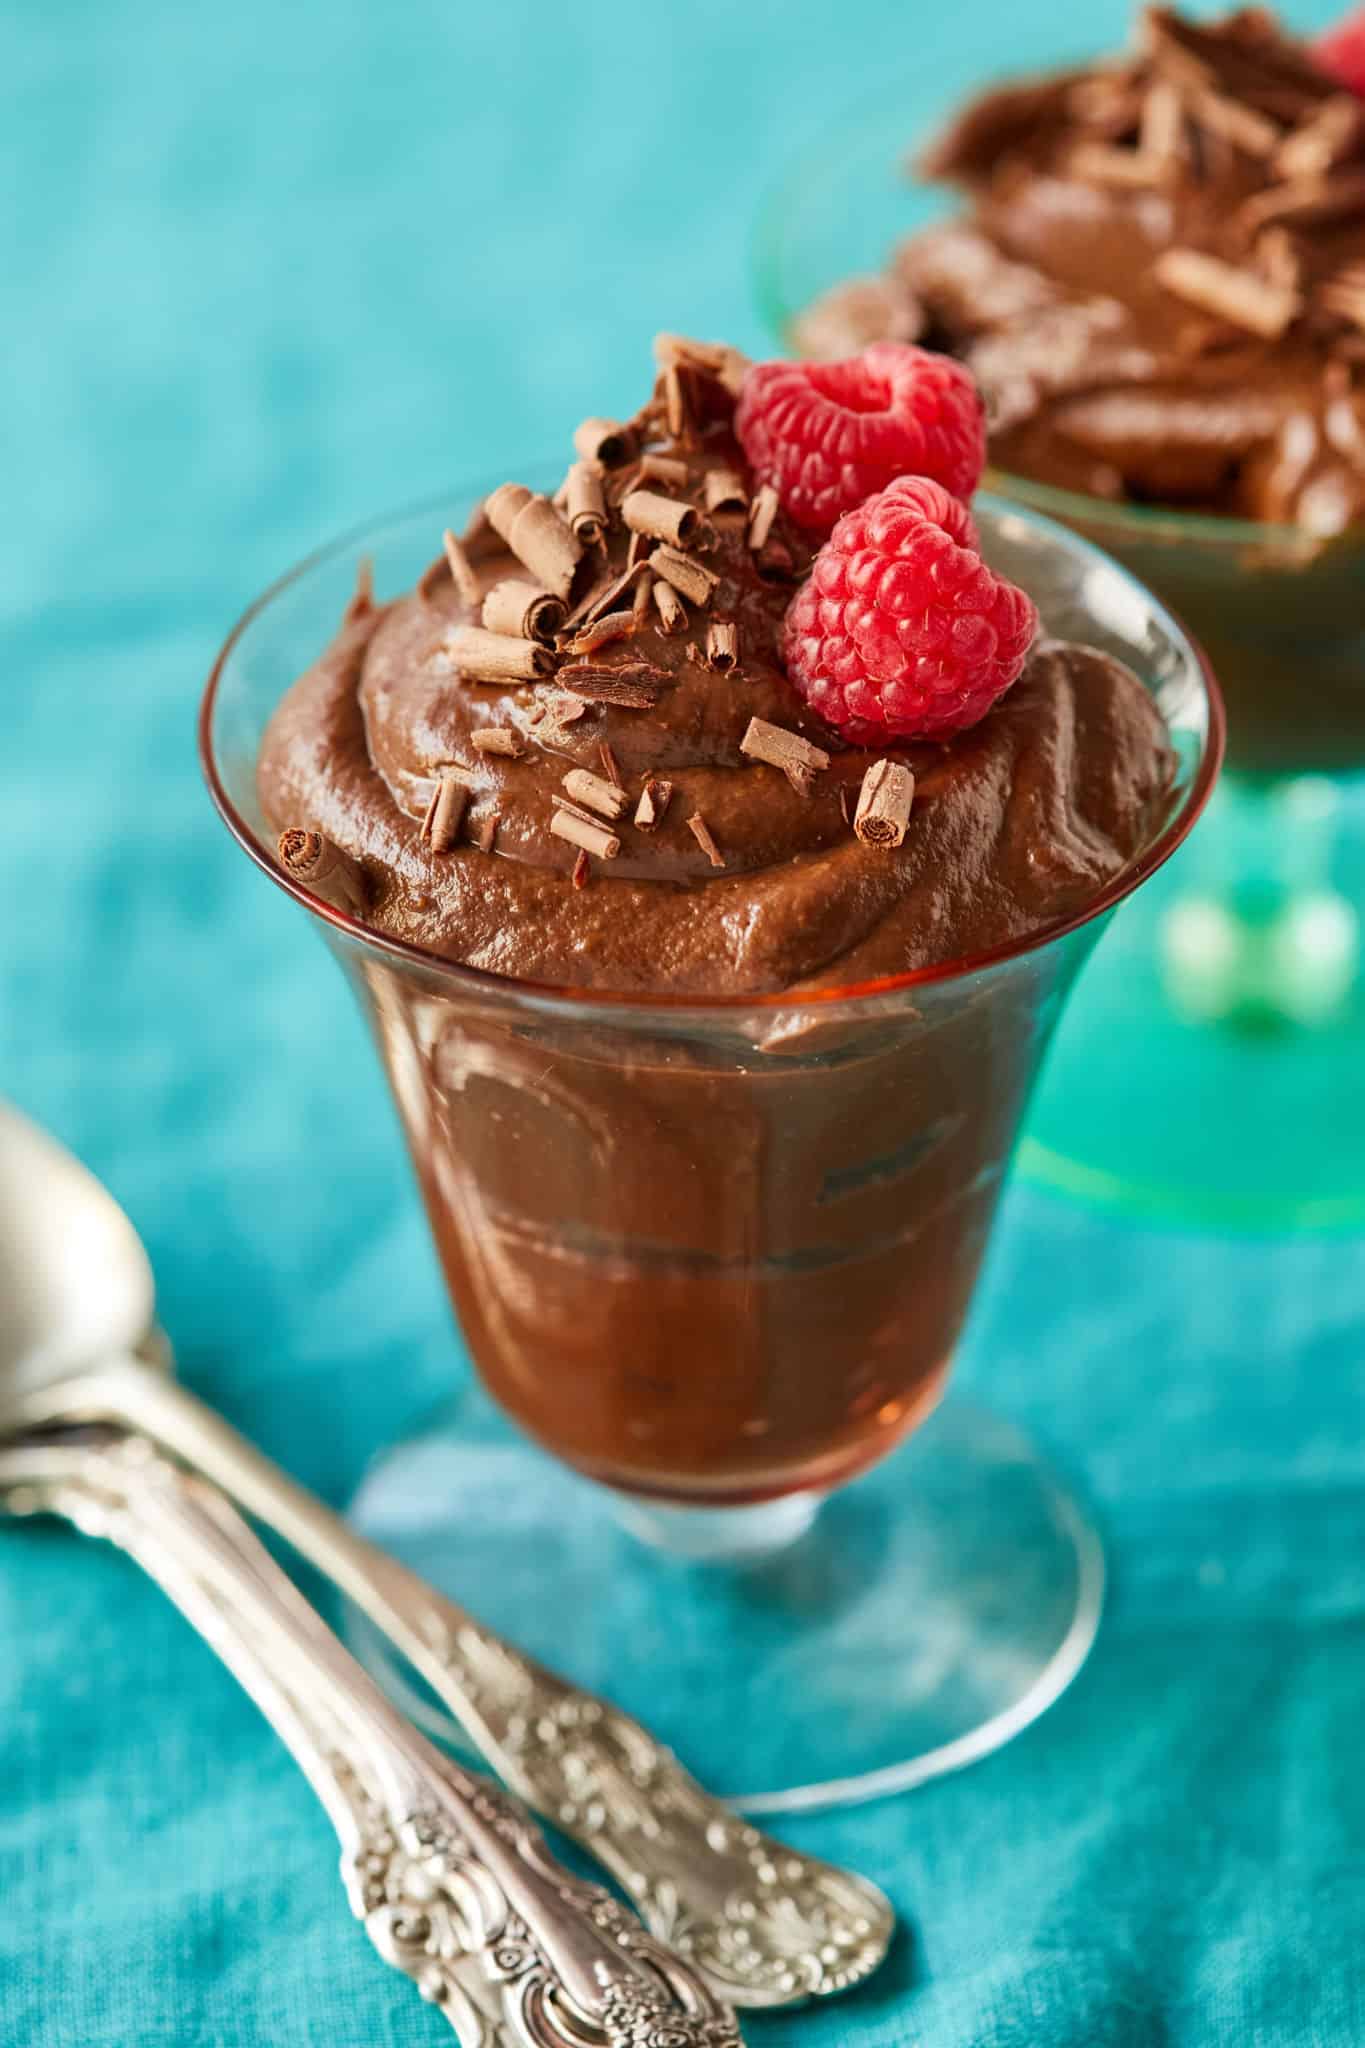 Avocado Chocolate Pudding, topped with raspberries.